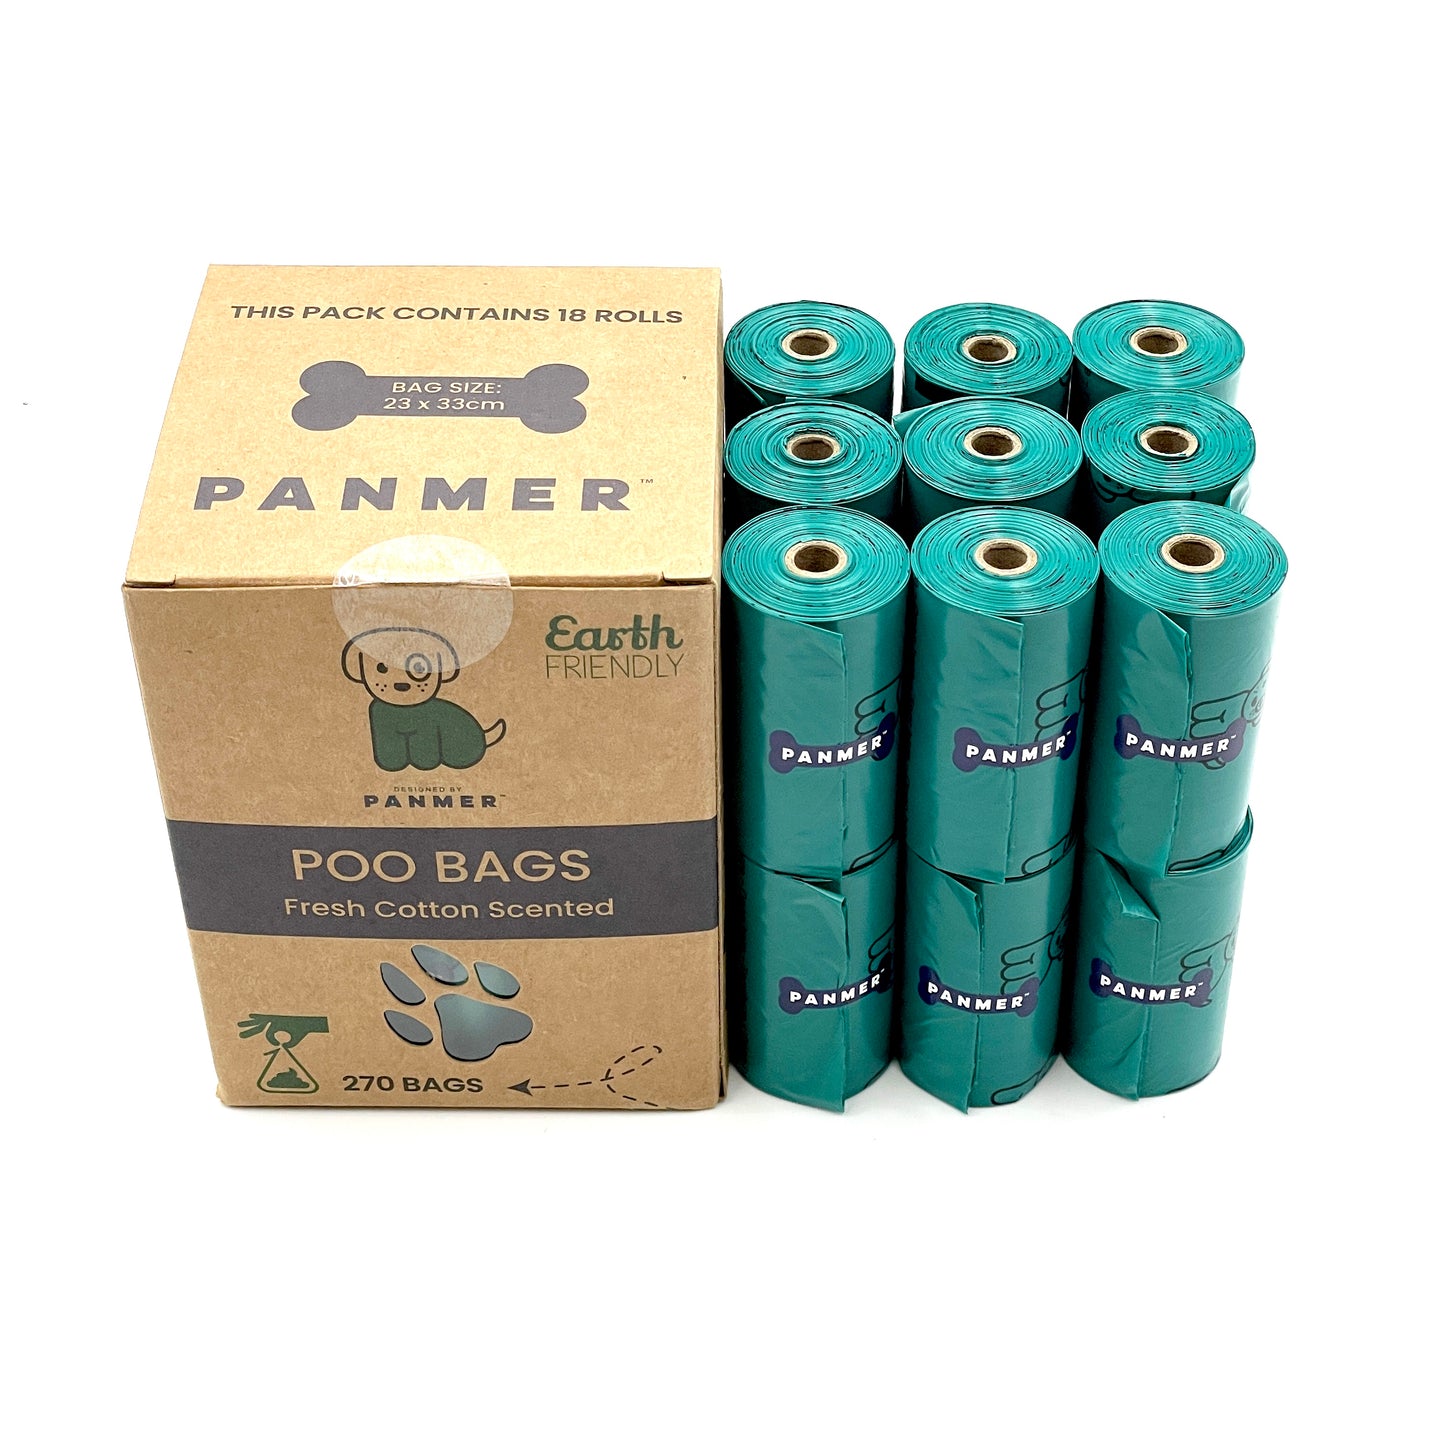 WHOLESALE – Poo Bags - PCR – Rolls – Cotton Fresh Scented – 270bags - #PCRPB270 - Pet Wipes & Poo Bags